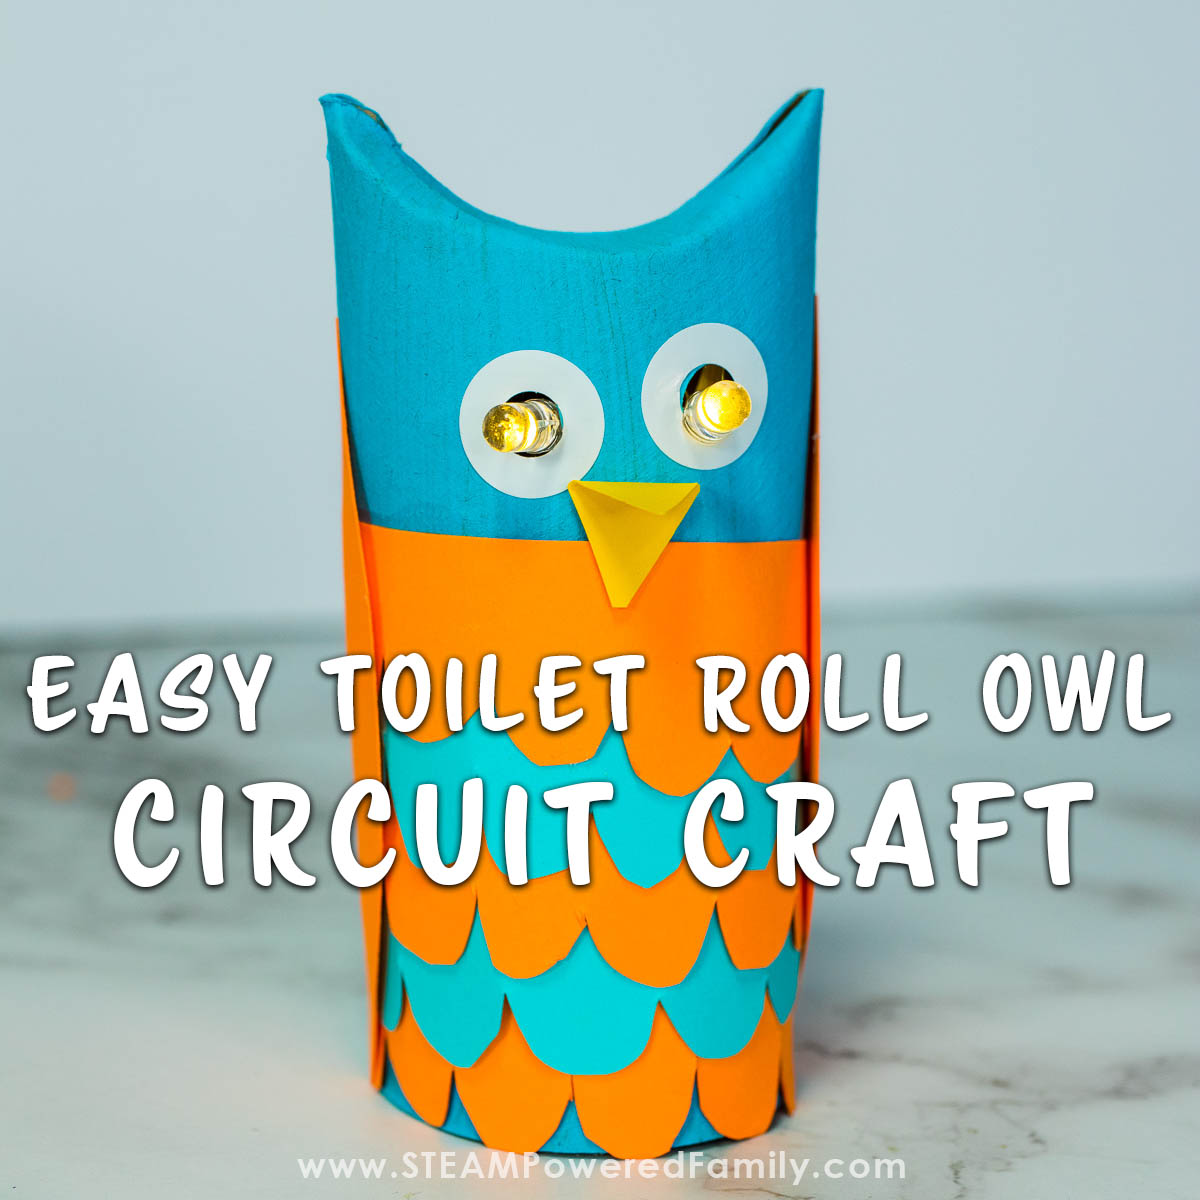 Toilet Roll Owl Circuit Craft with eyes that light up